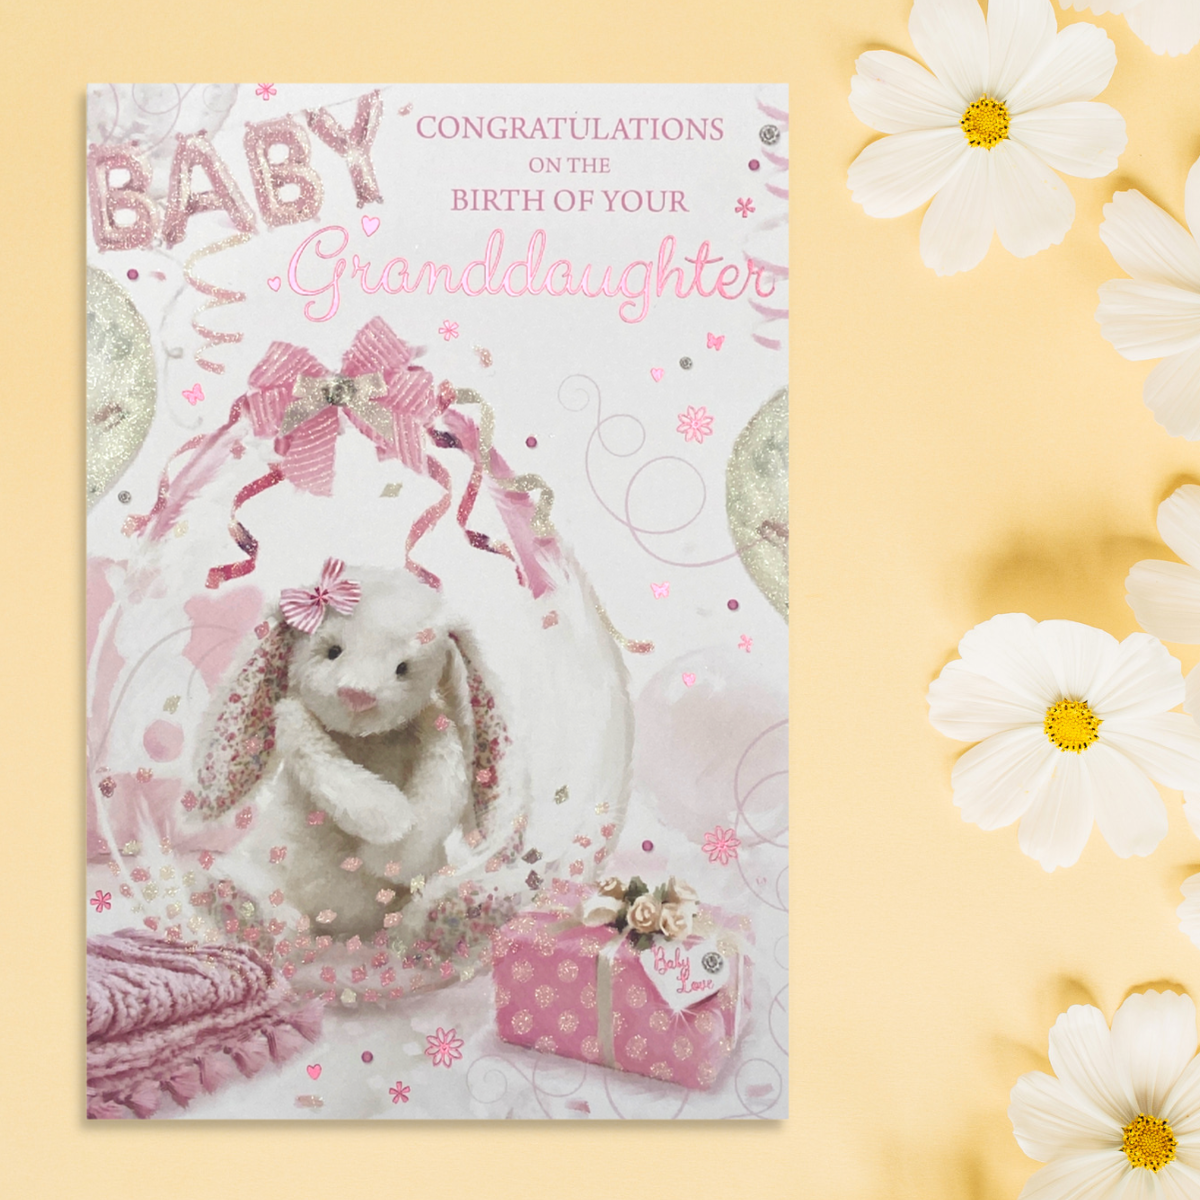 Front image of Granddaughter Birth card with cute white bunny in decorated balloon, with gifts and decorations